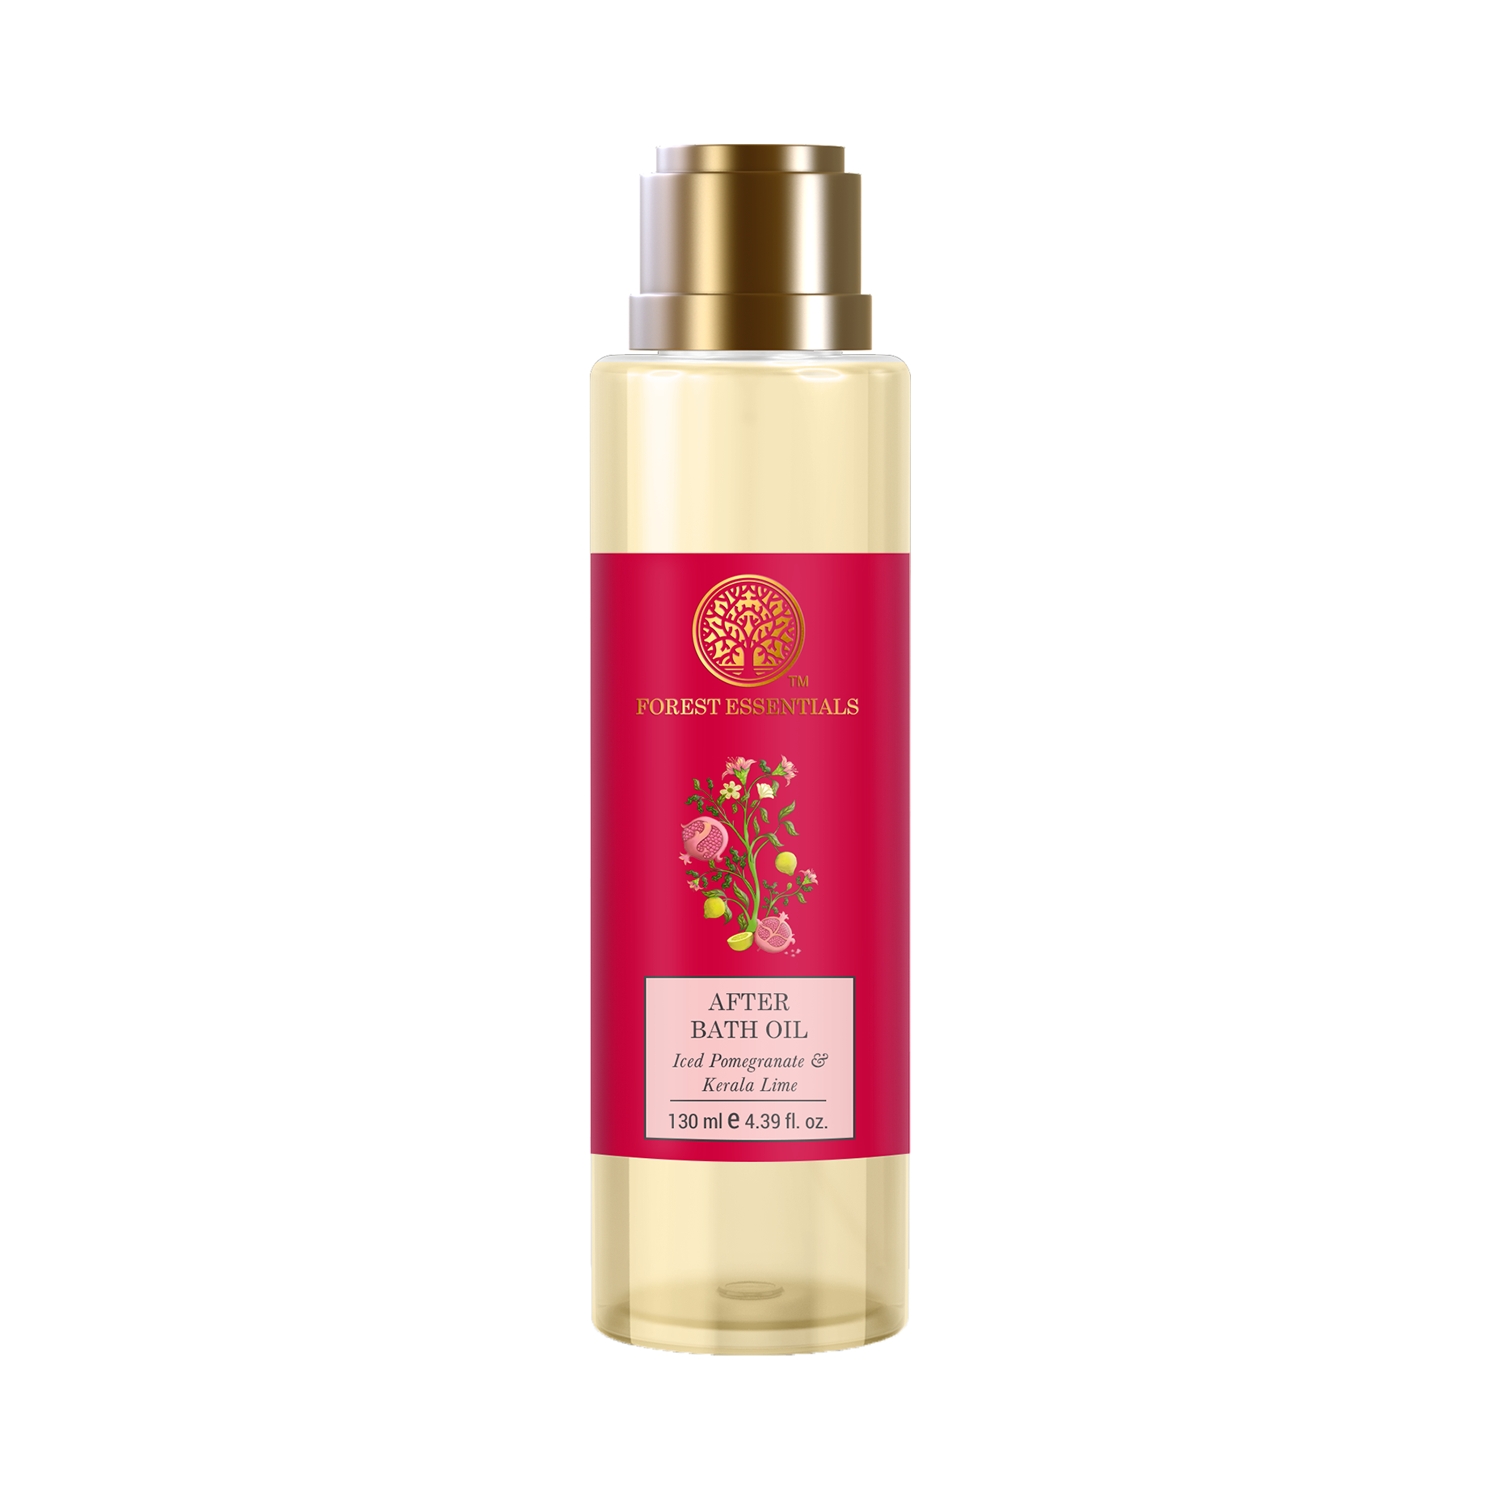 Forest Essentials | Forest Essentials Iced Pomegranate & Kerala Lime After Bath Oil (130ml)